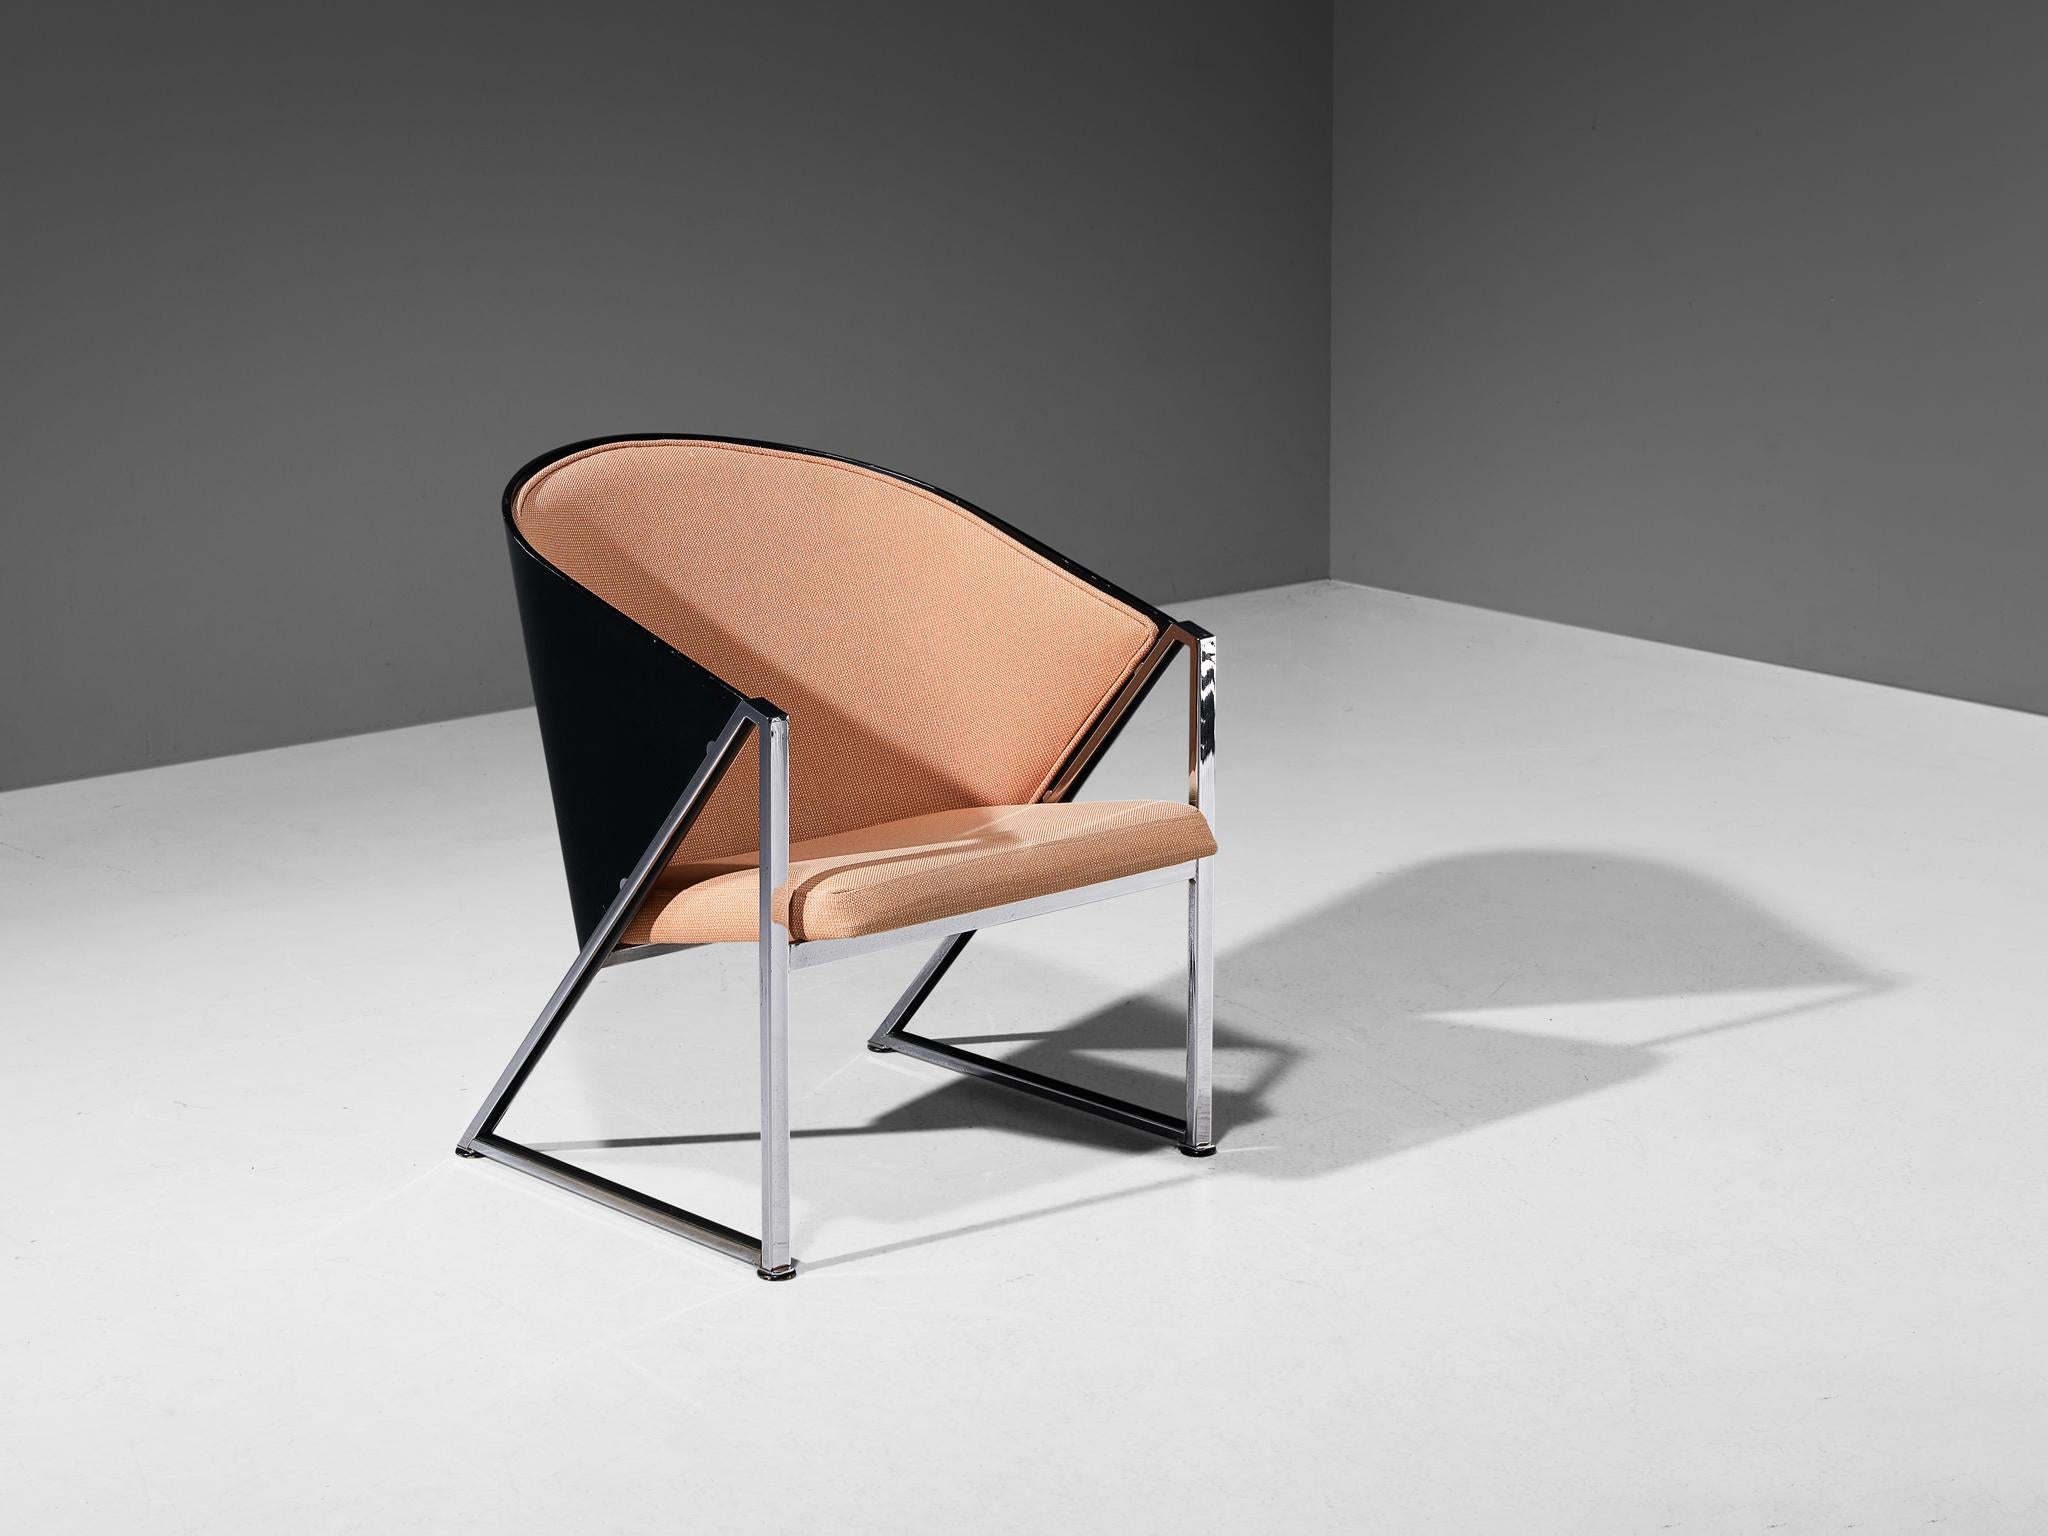 Jouko Järvisalo for Inno Interior OY, armchair model 'Mondi Soft', chrome-plated metal, fabric, lacquered wood, Finland, design 1986 

Finnish interior architect Jouko Järvisalo created this lounge chair that features an unconventional form. This